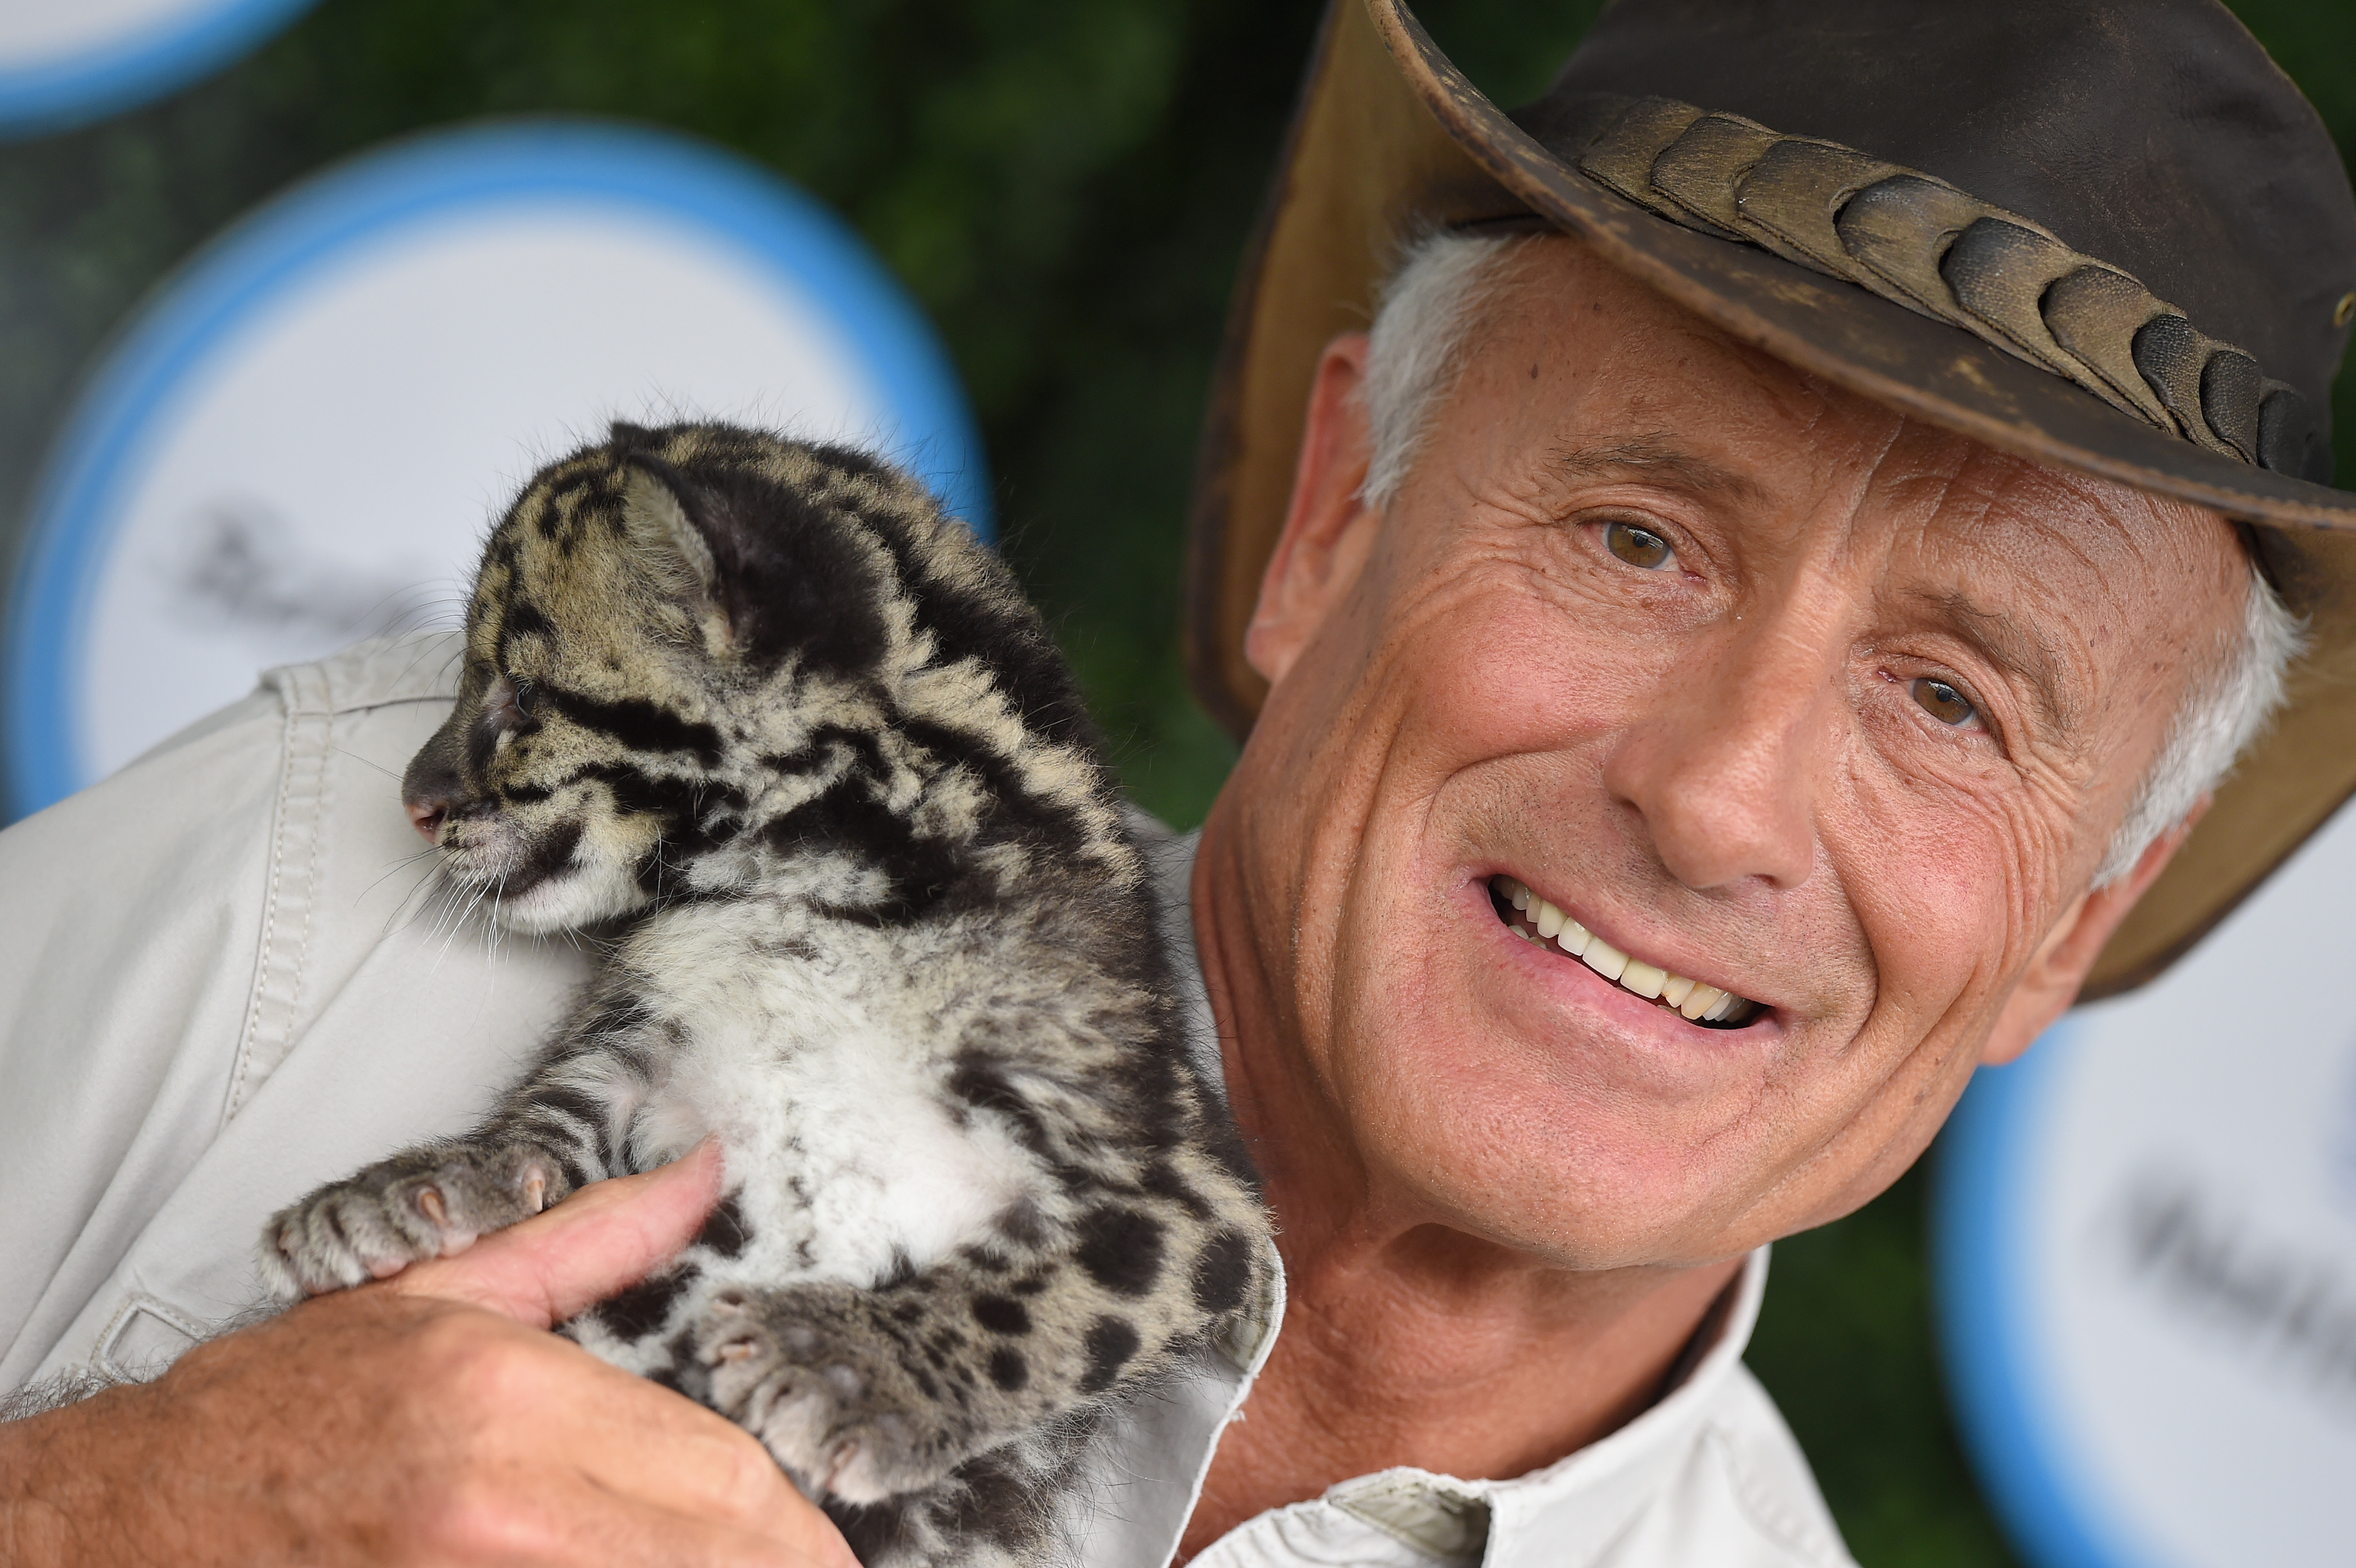 Zoologist Jack Hanna holding a wild baby cat at an event 